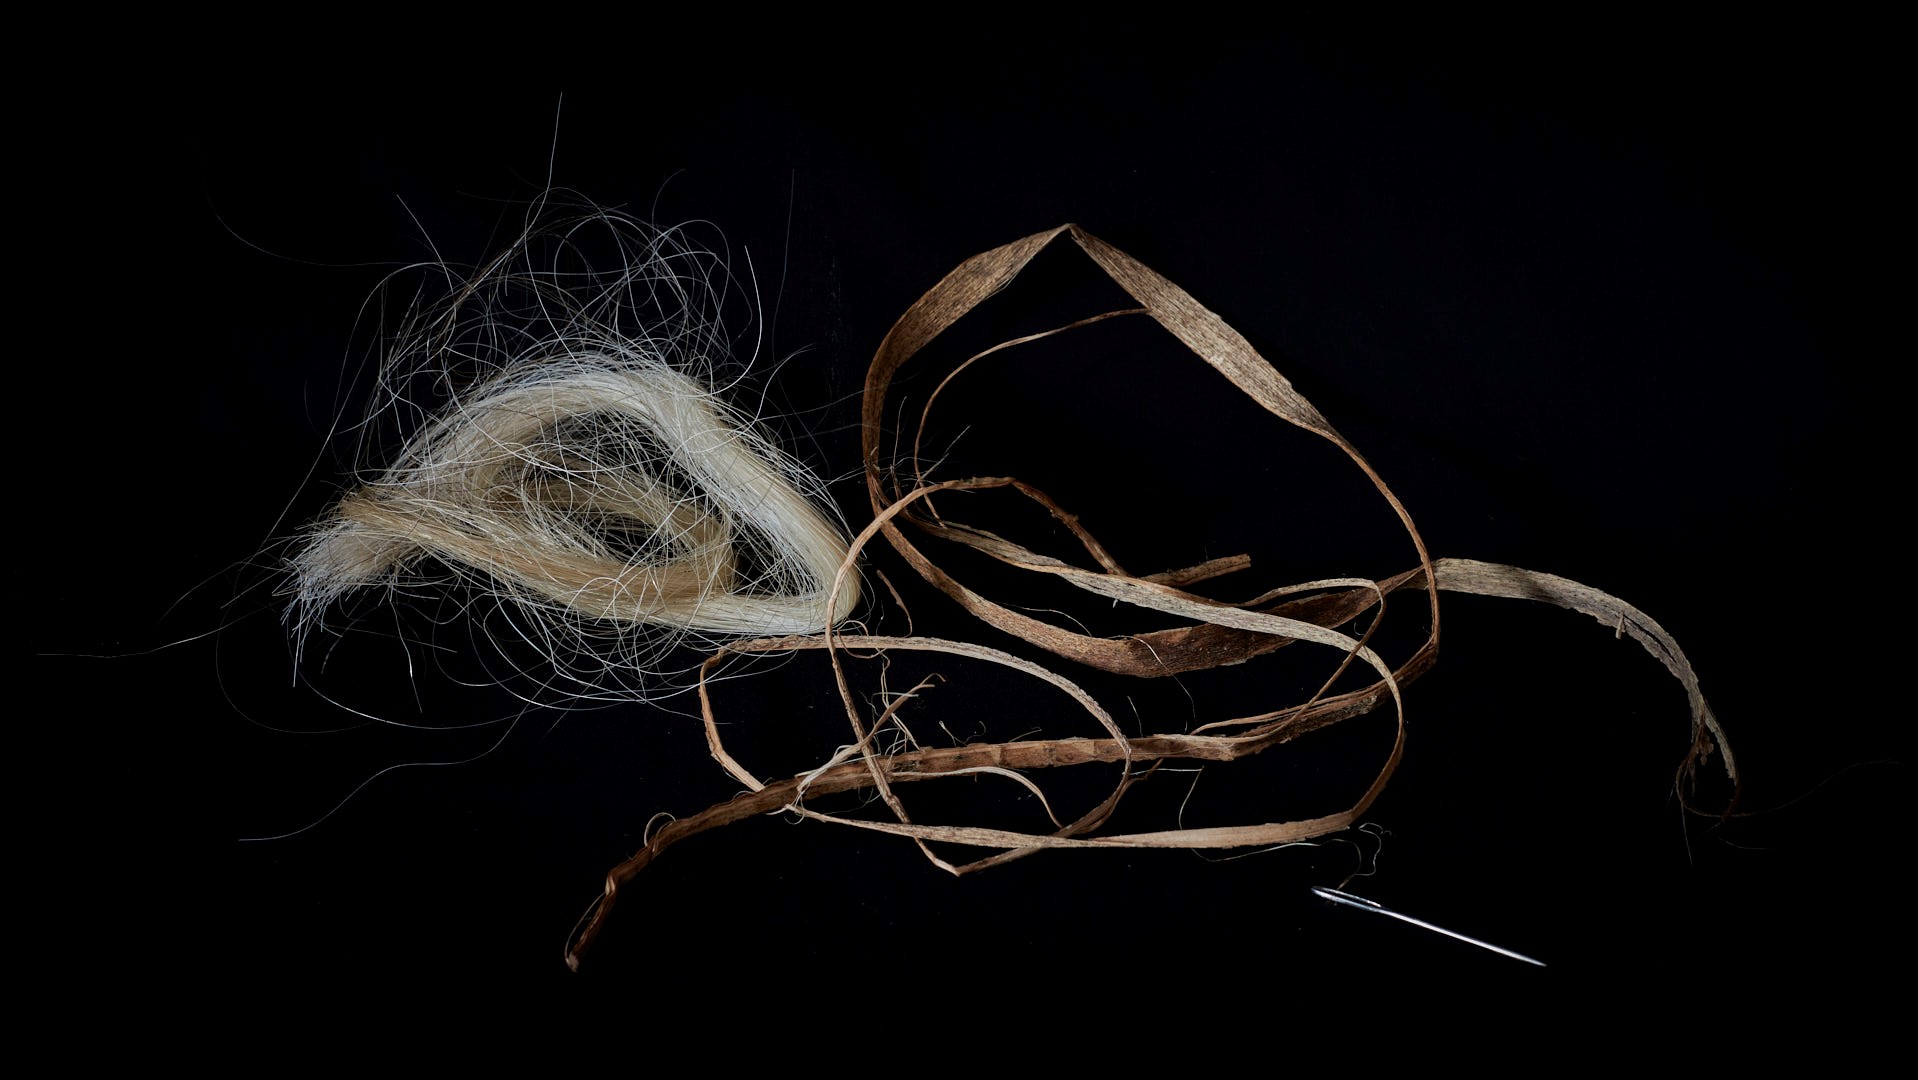 Ancient threads, horse hair, sisal and needle